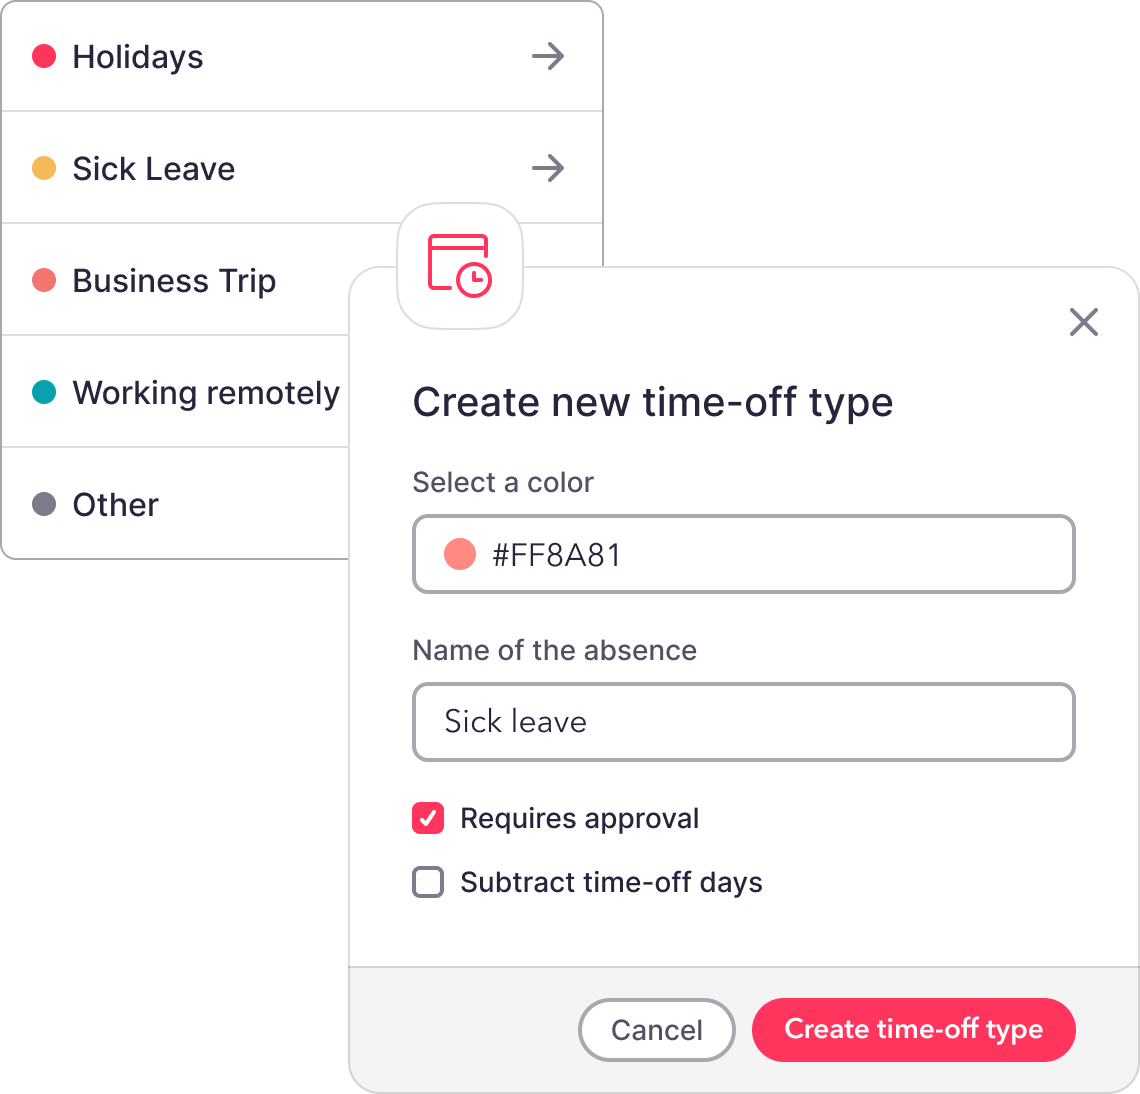 Create new time-off type